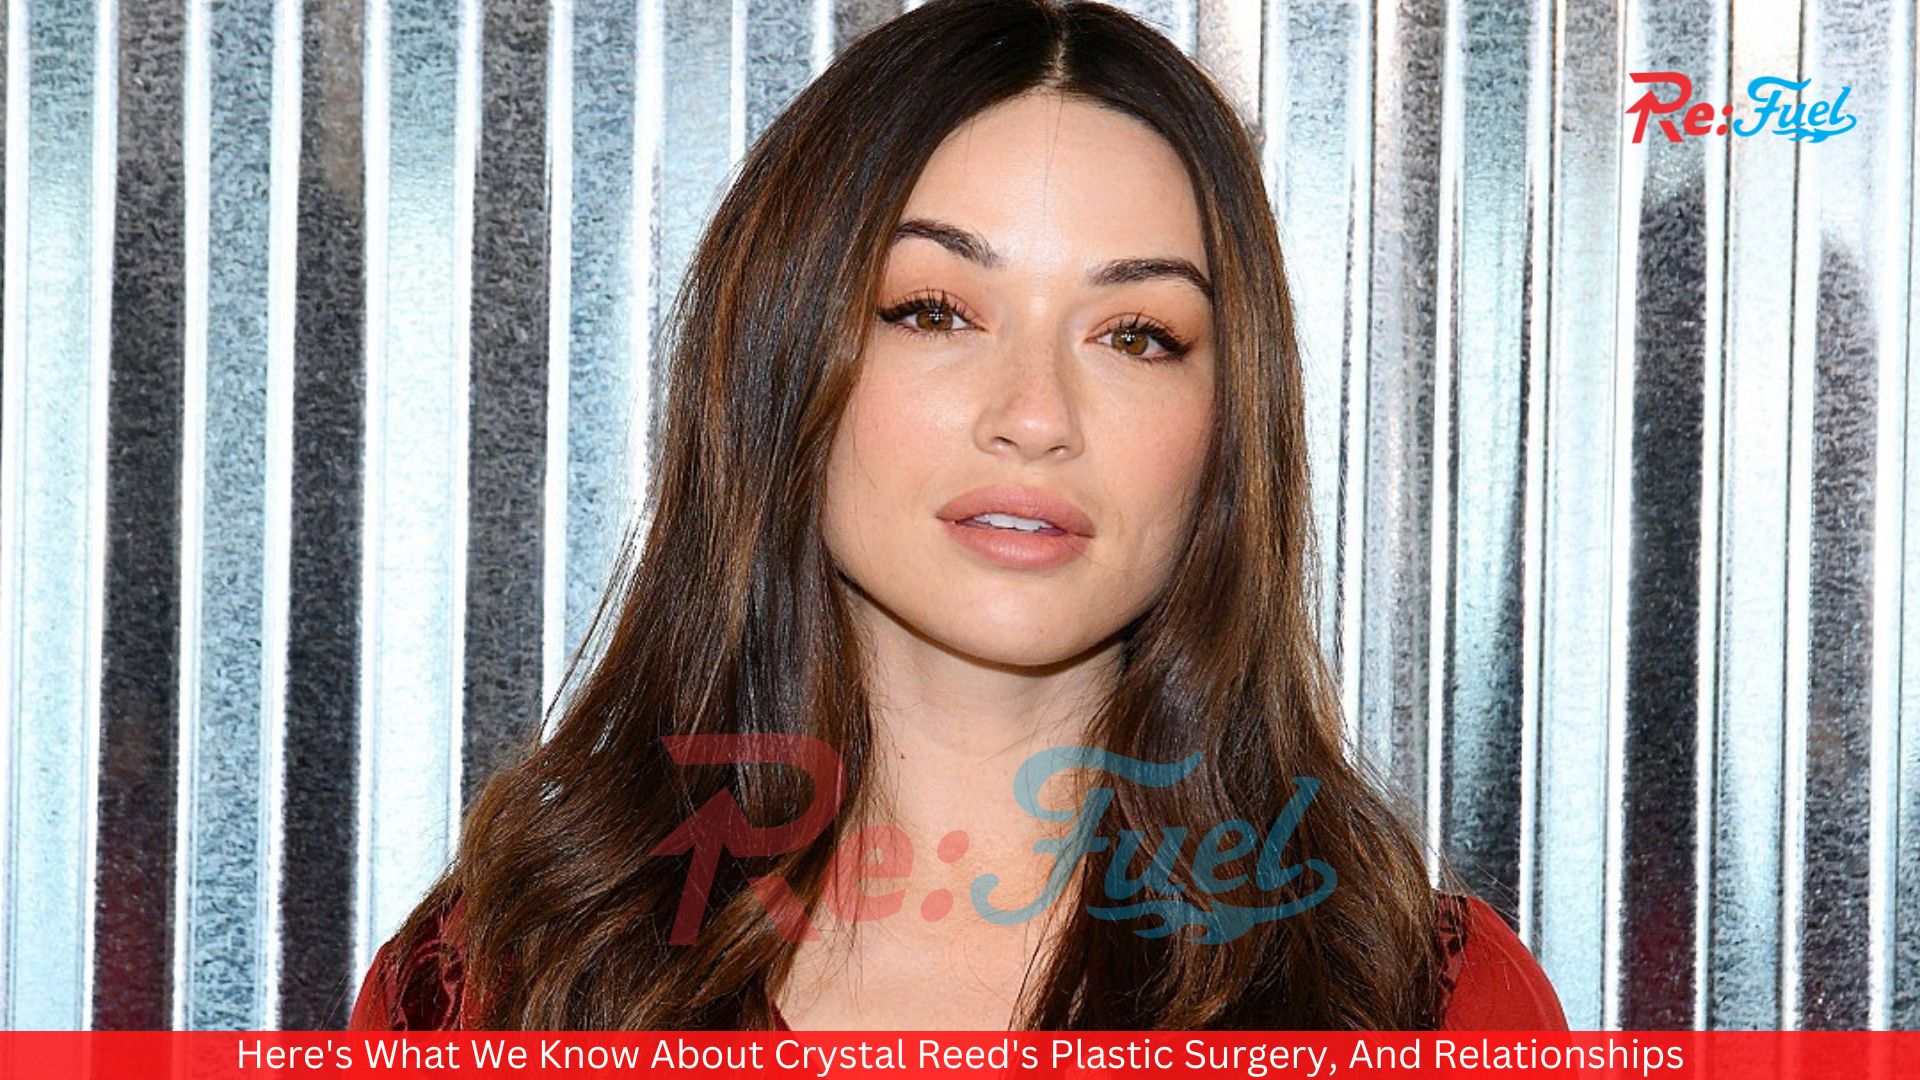 Here's What We Know About Crystal Reed's Plastic Surgery, And Relationships